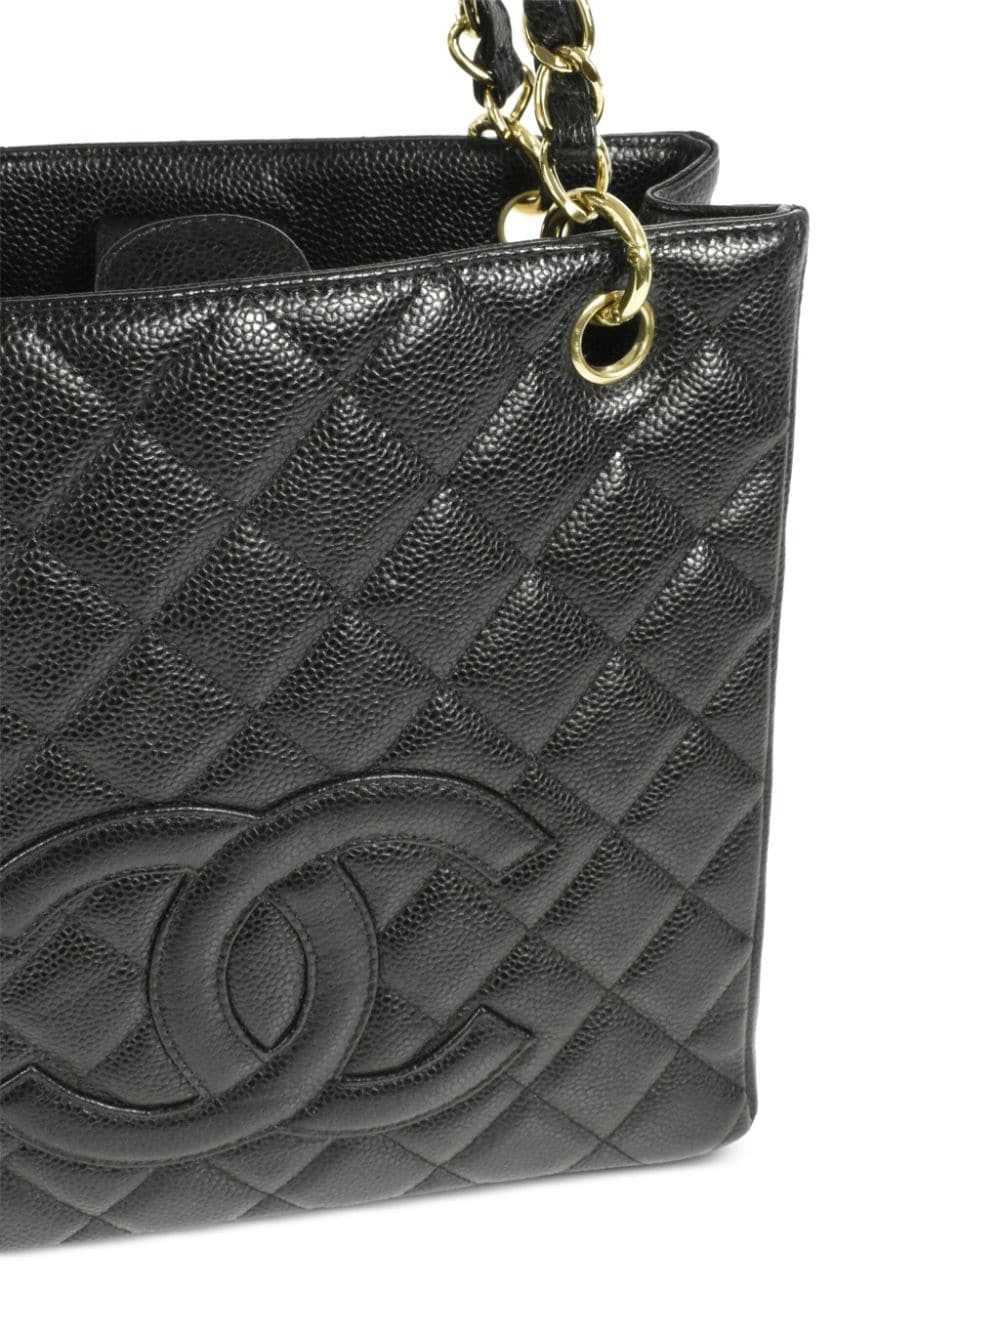 CHANEL Pre-Owned 2003 Petite Shopping Tote bag - … - image 4